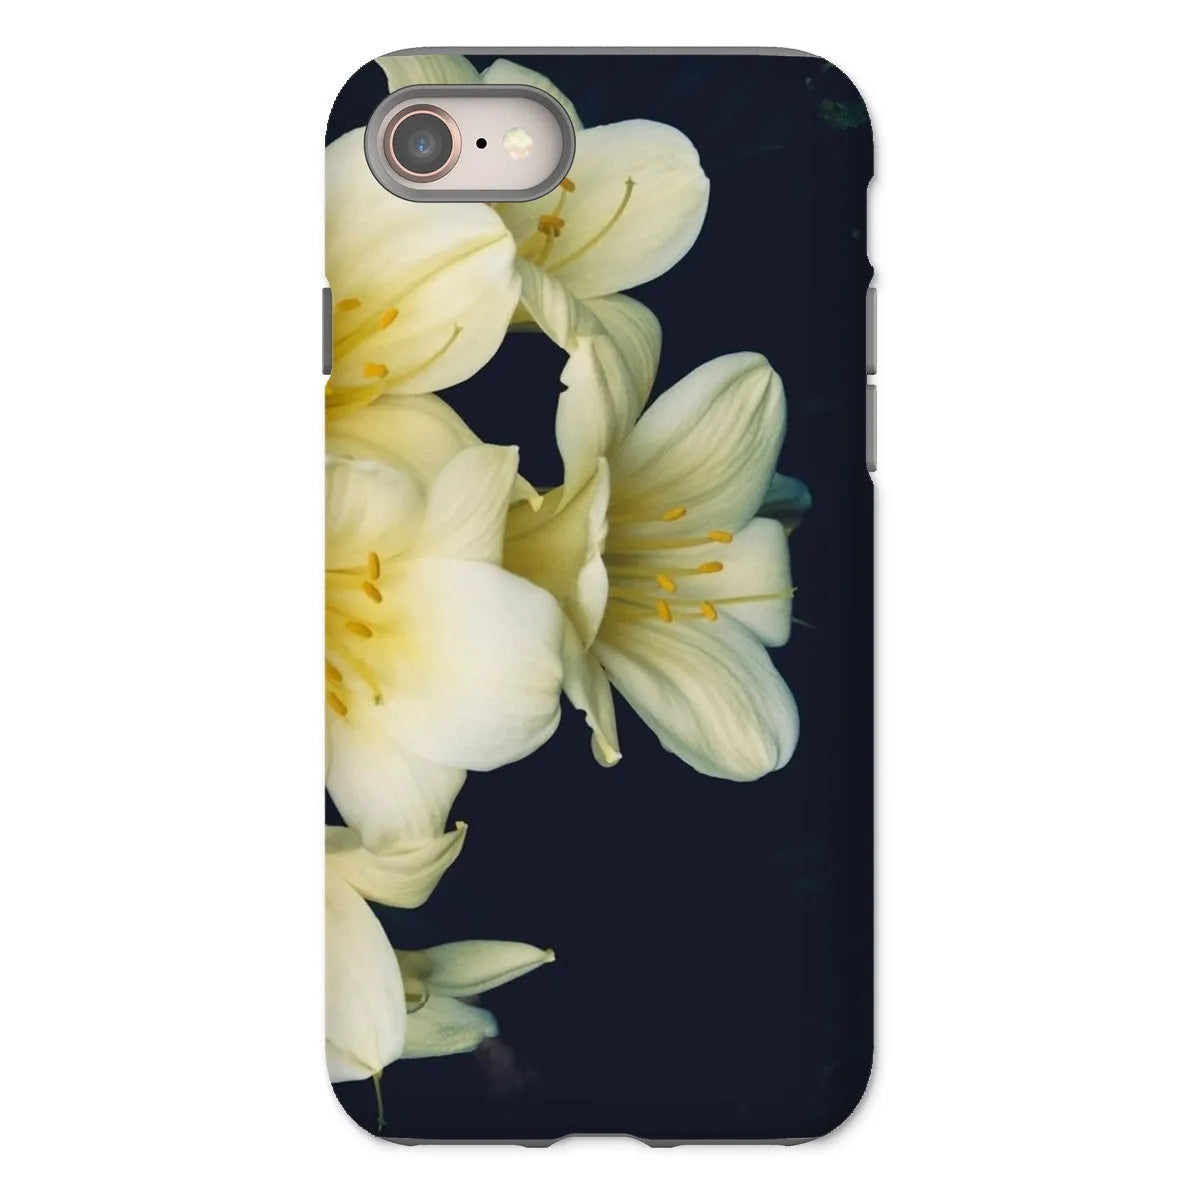 Flower Power Too Tough Phone Case - Iphone 8 / Matte - Mobile Phone Cases - Aesthetic Art